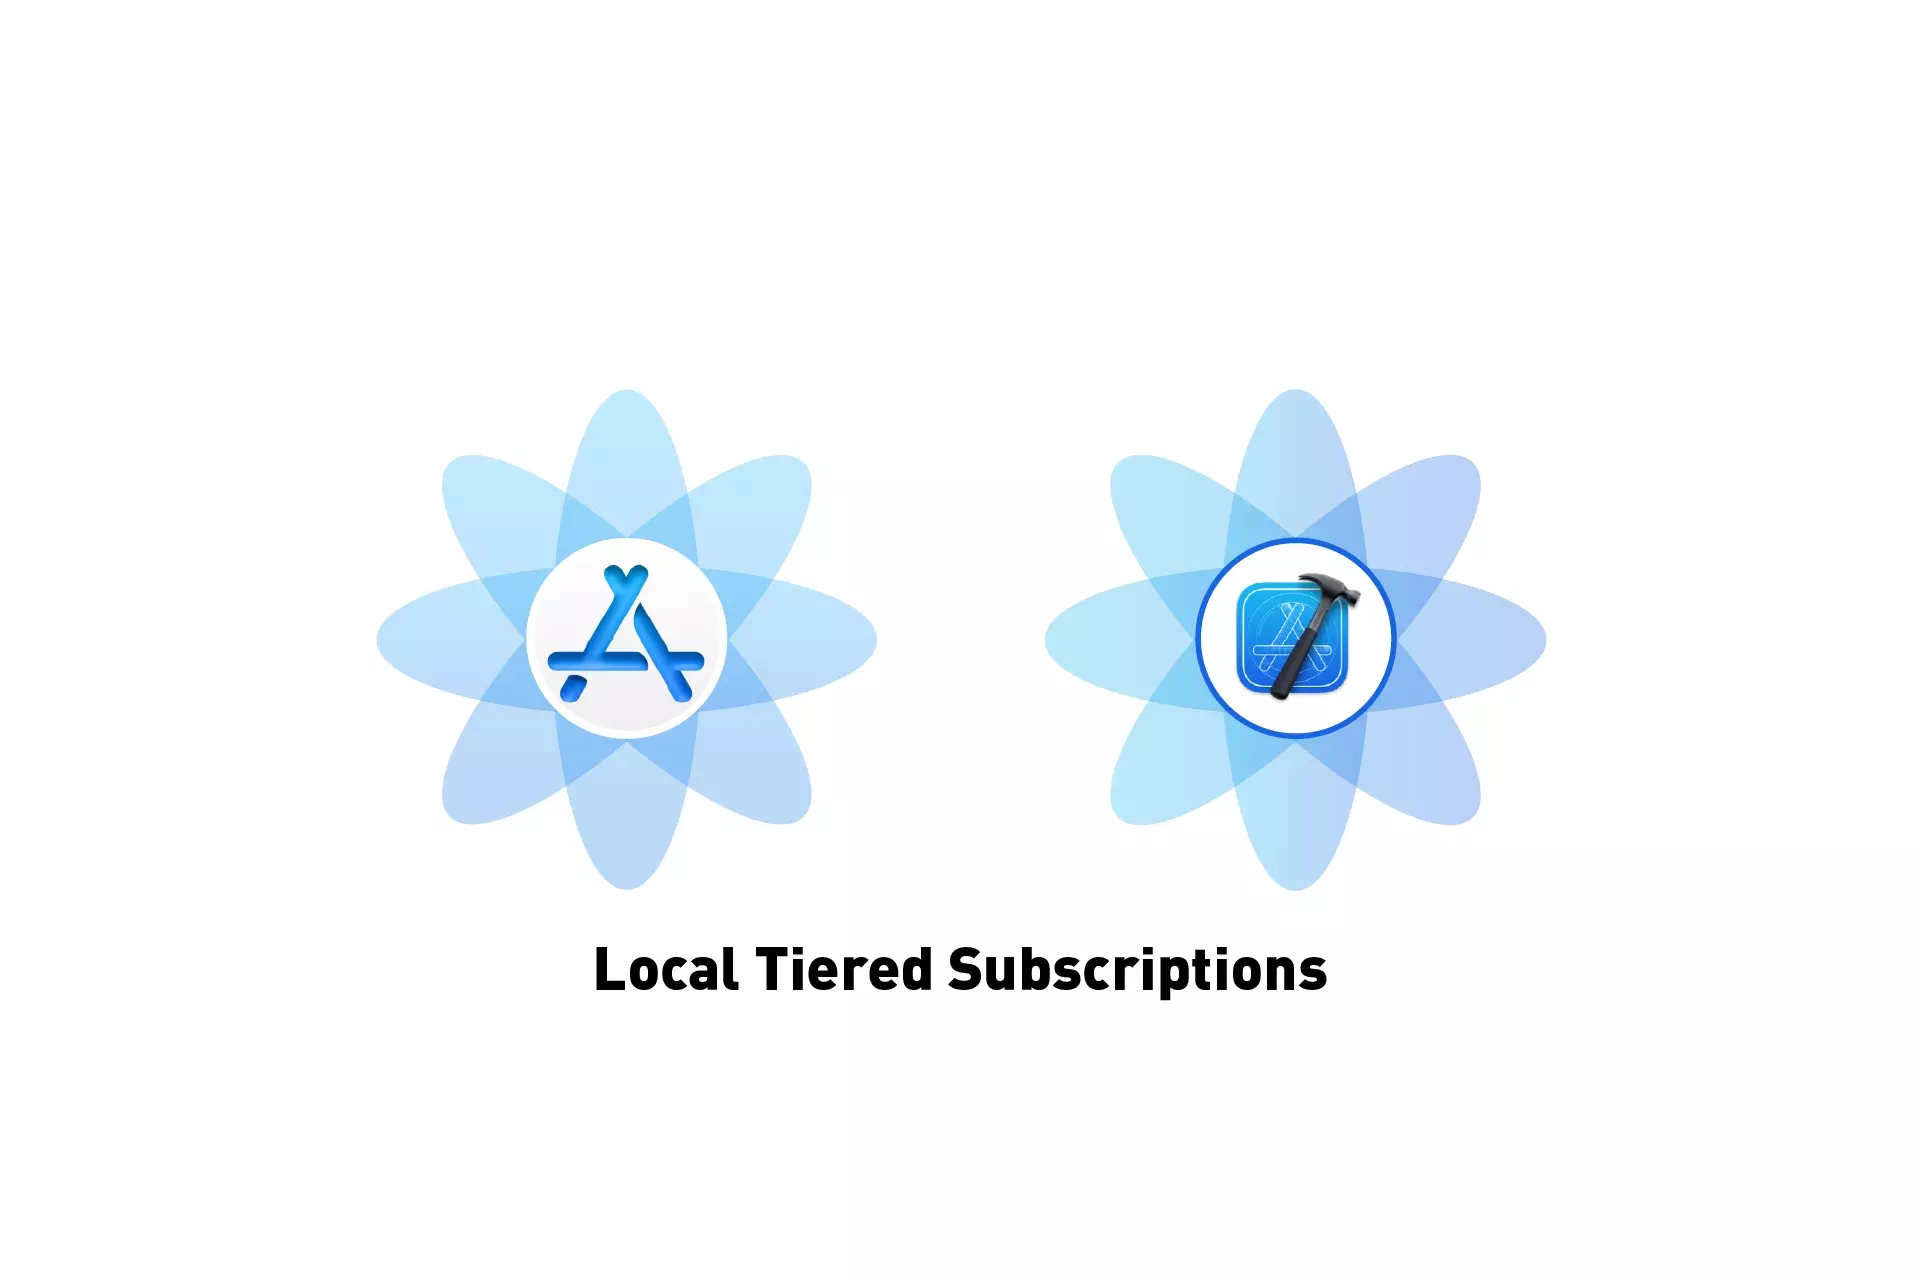 Two flowers that represent StoreKit and Xcode side by side, beneath them sits the text "Local Tiered Subscriptions."